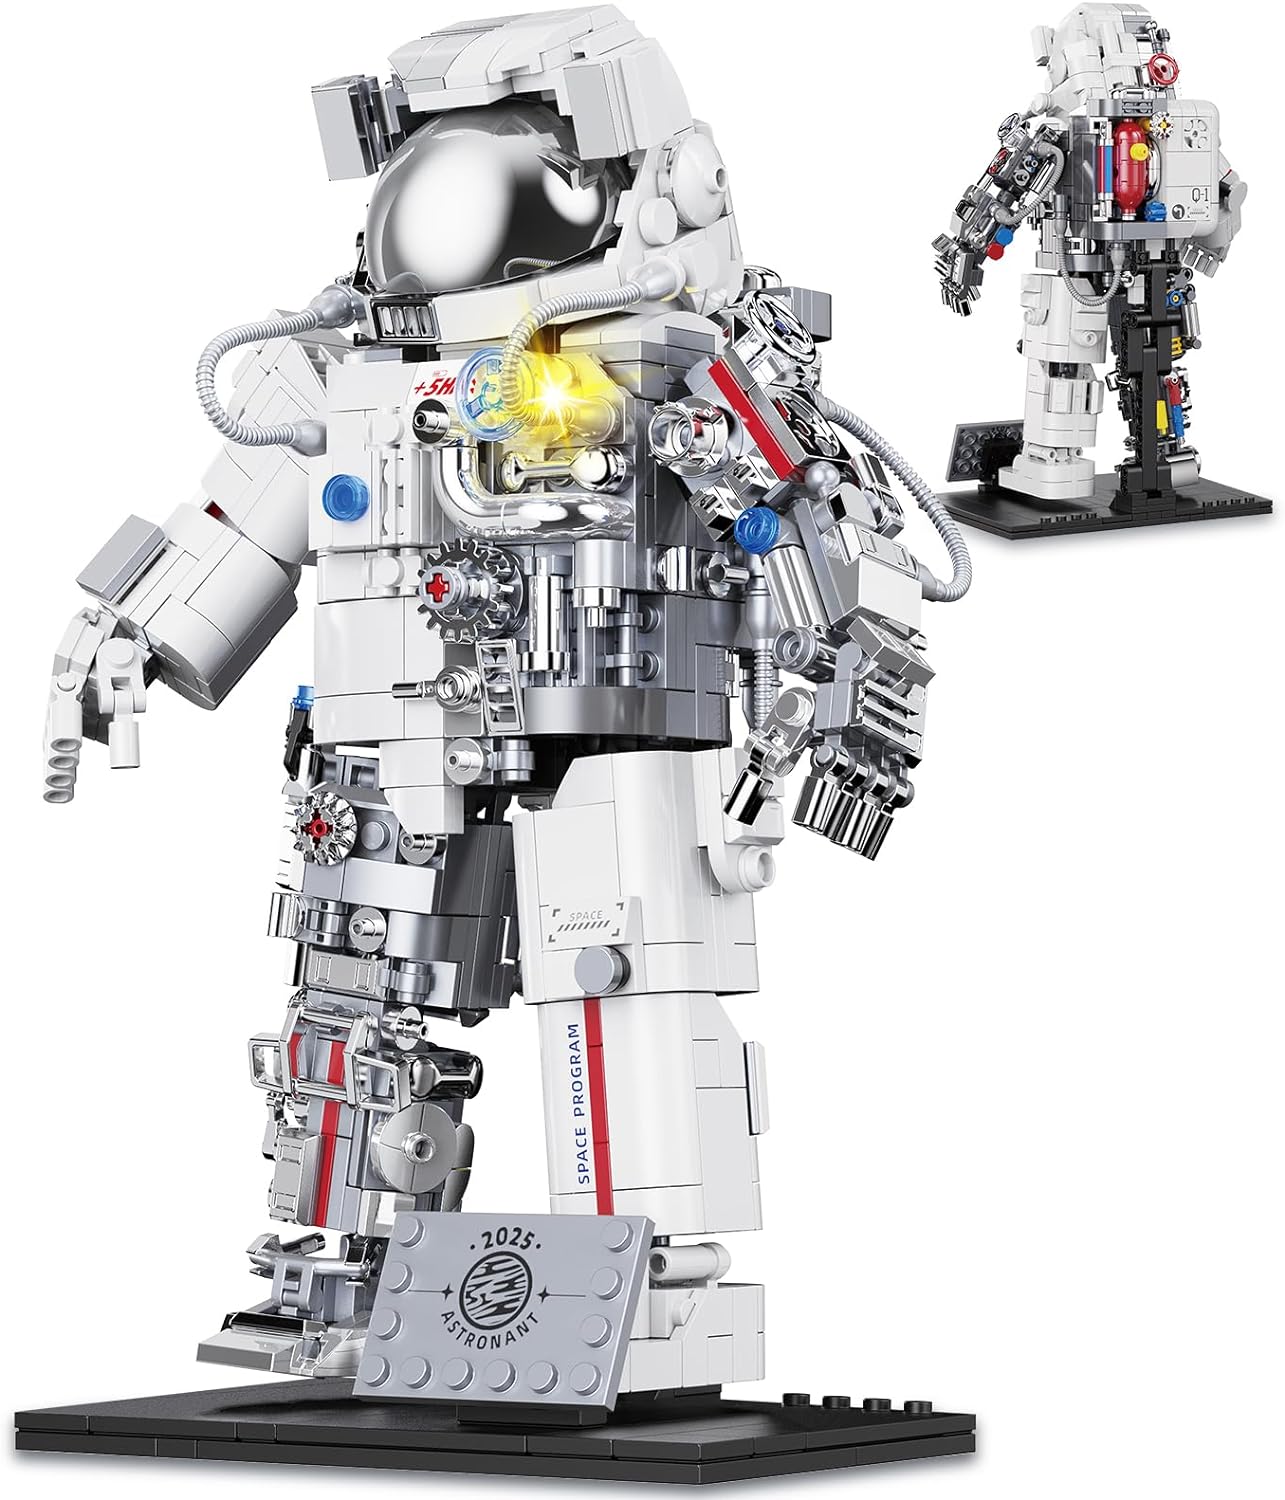 Astronaut Building Block Compatible with Lego Space Model - Spacesuit with LED Light - Cool Collectible